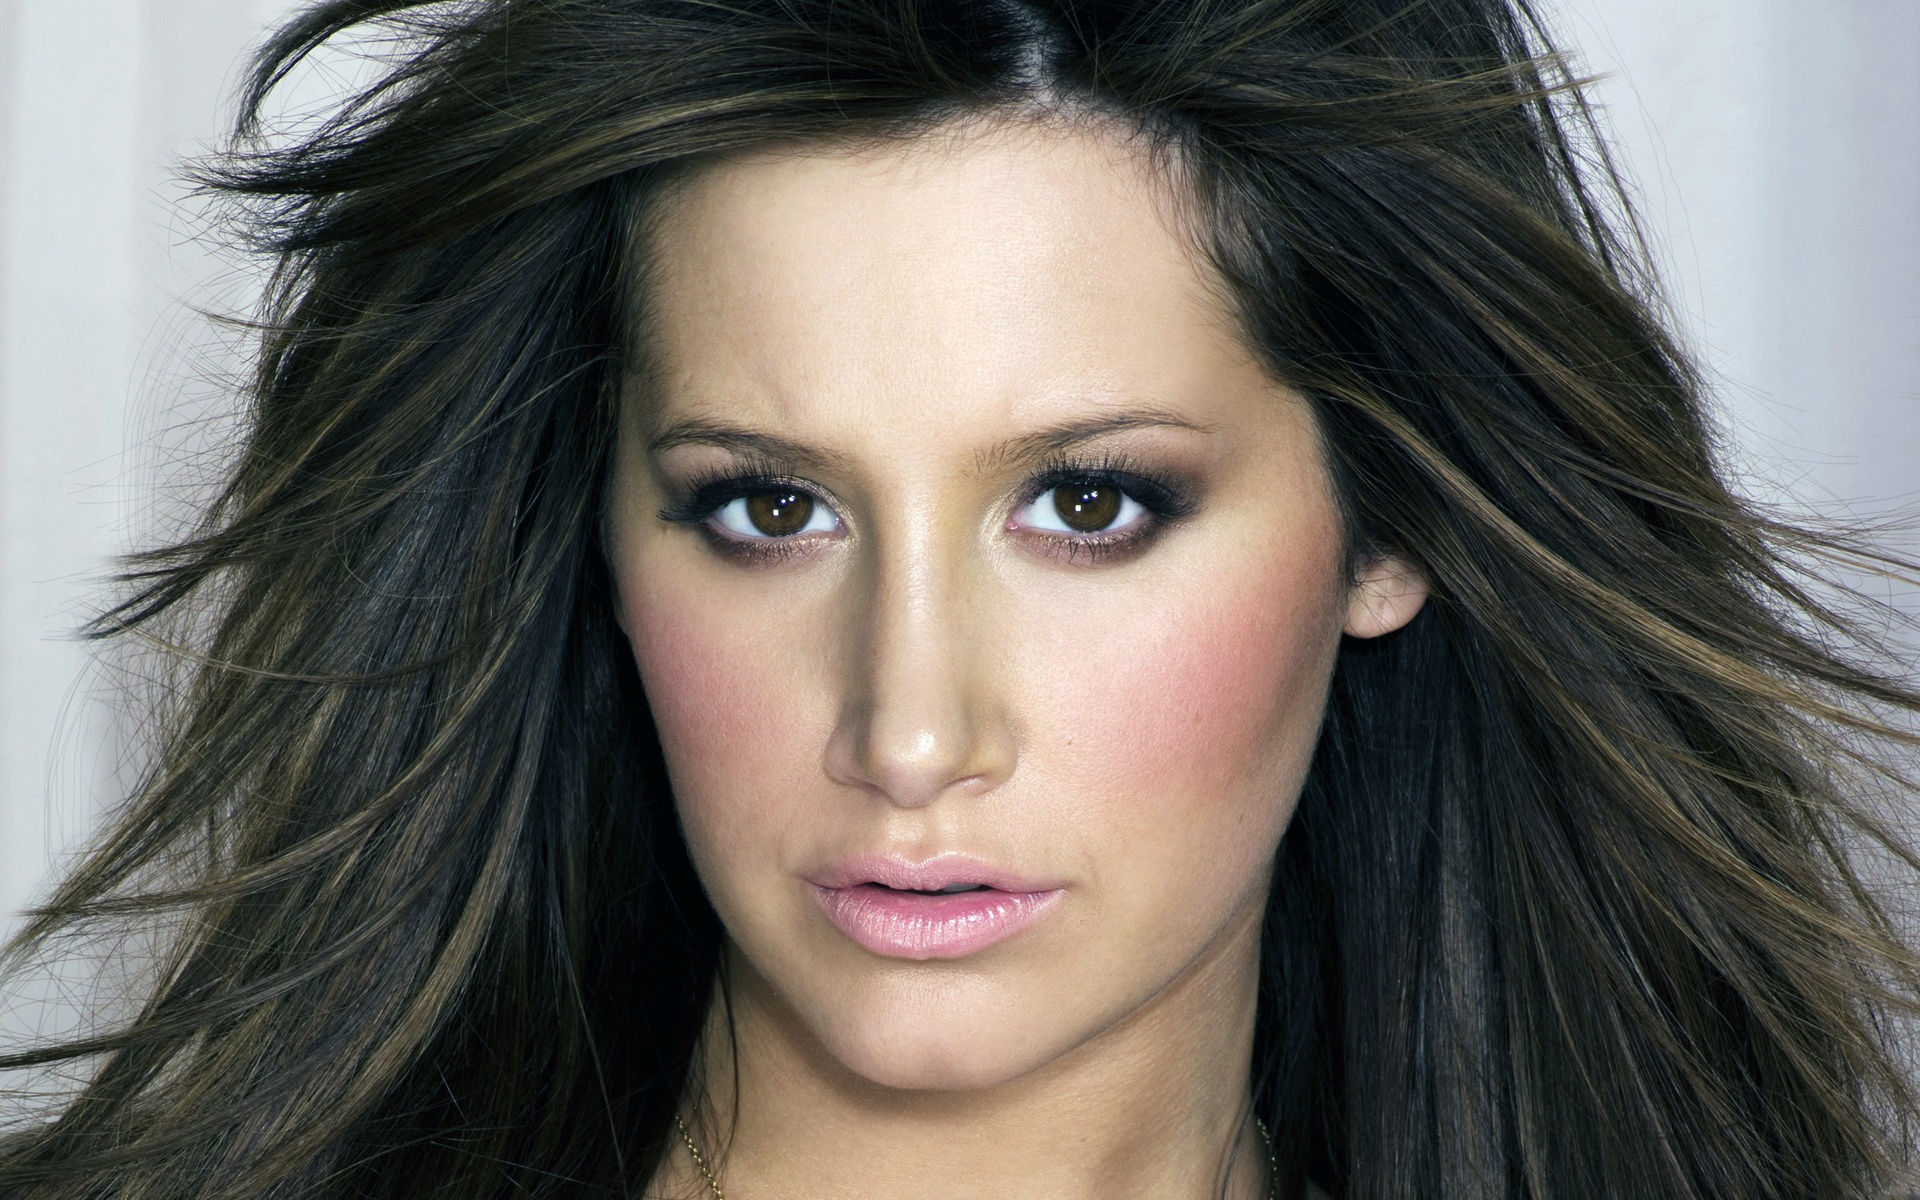 3340x1440 Resolution Ashley Tisdale New Close Up Pics 3340x1440 ...